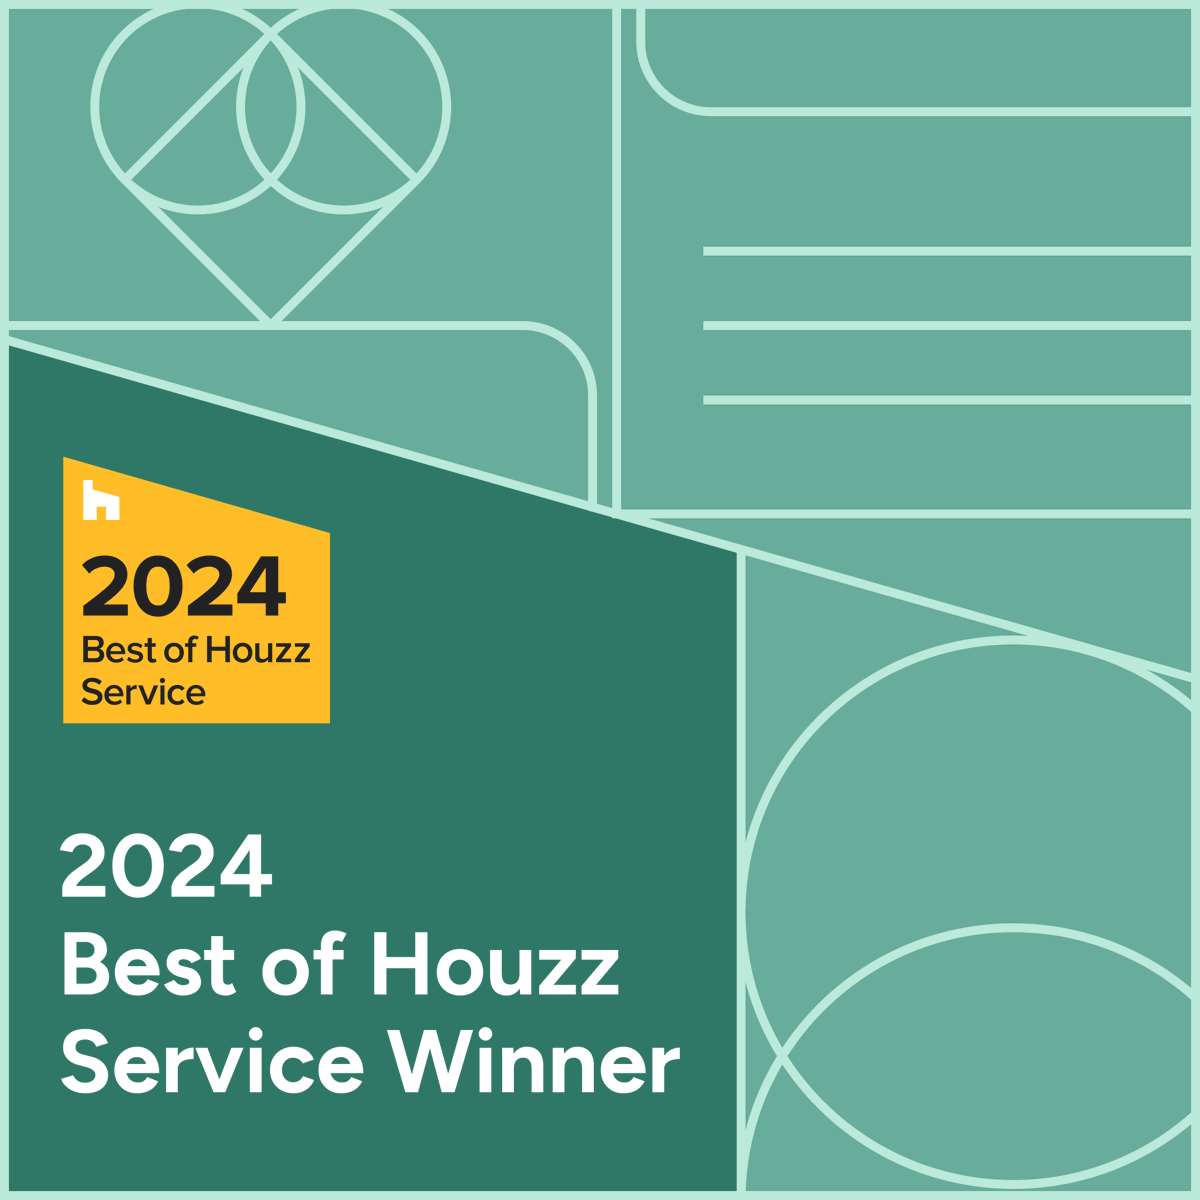 We are Honored Again with the 2024 Best of Houzz Service Award for Consistently Exceptional Service 🏆
#BestOfHouzz2024 #HouzzServiceAward #ExcellenceInDesign #HouseDesigner #AffordableDesign #AwardWinningService #DesignInnovation